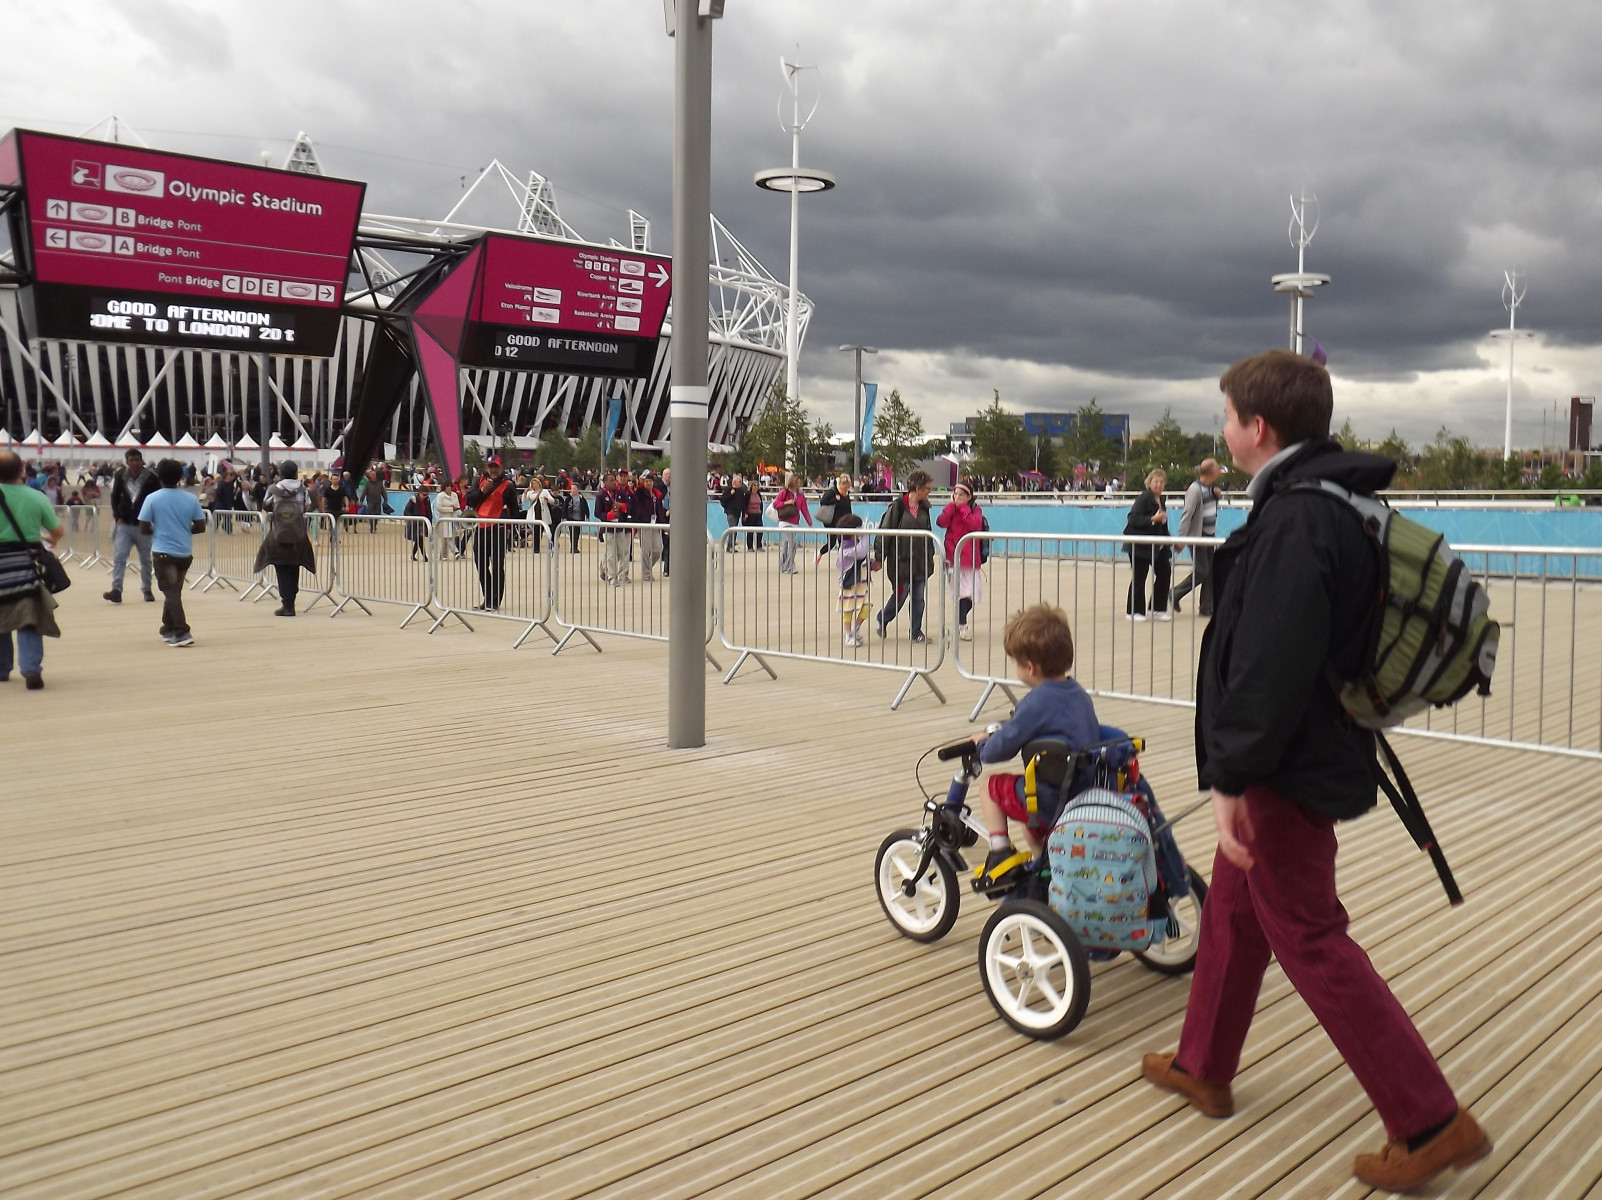 A child on a Tomcat Tiger cycling along a boardwalk up to the Olympic stadium. There is an adult behind holding the Carer Control.